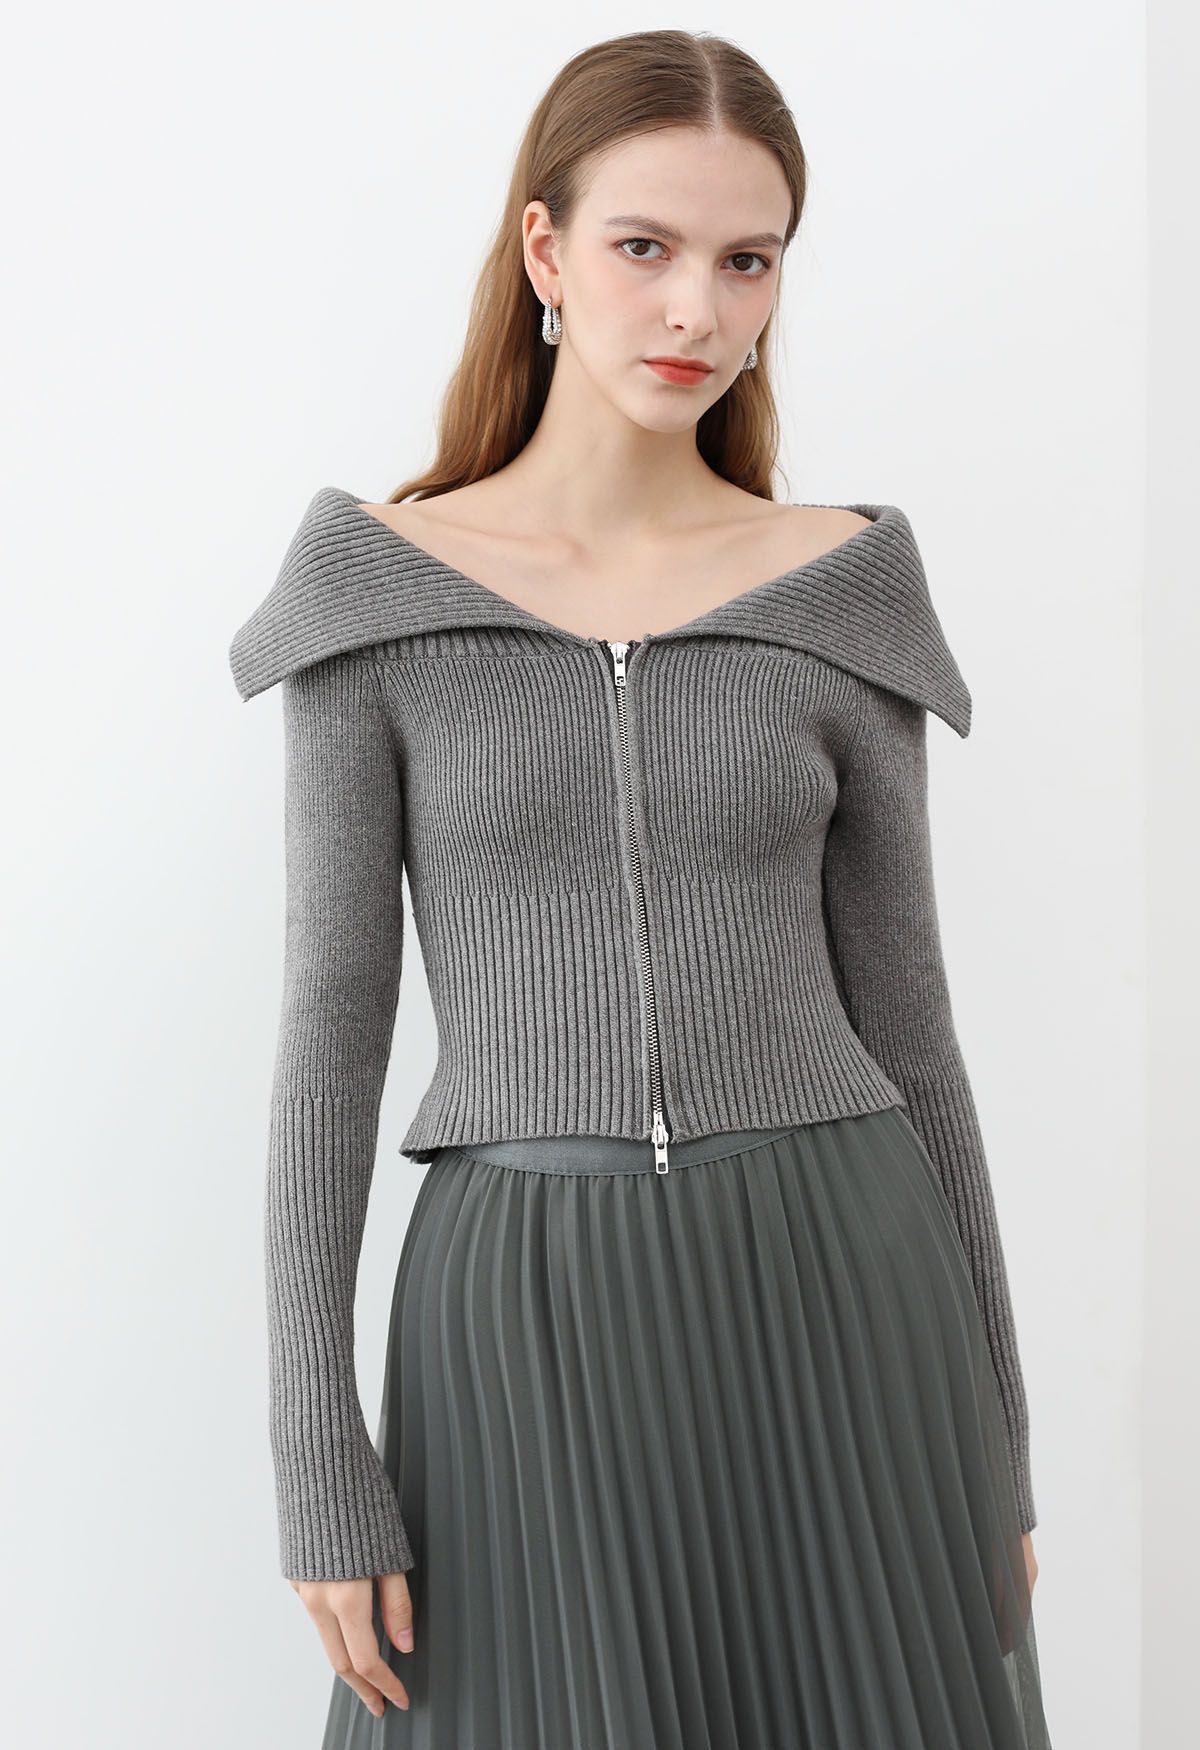 Flap Collar Zip Up Cropped Knit Top in Grey - Retro, Indie and Unique ...